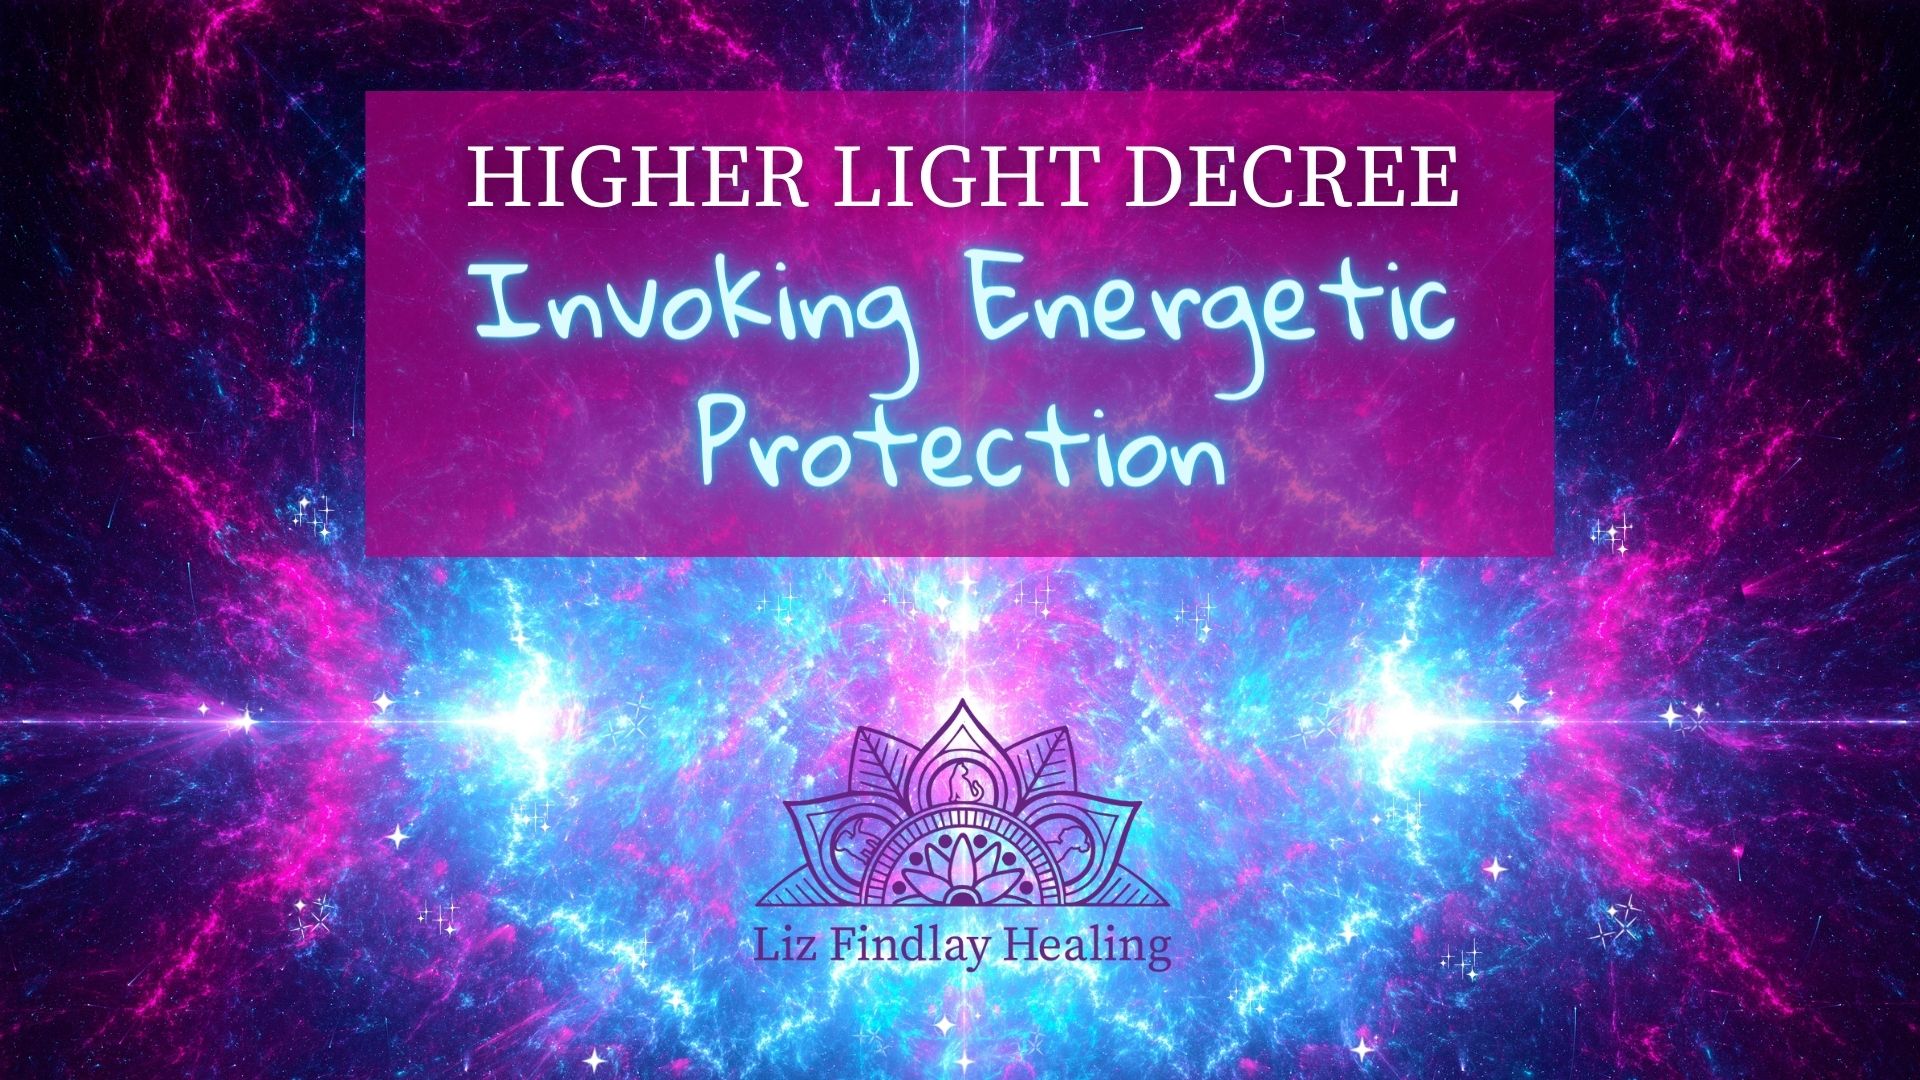 Invoking Energetic Protection